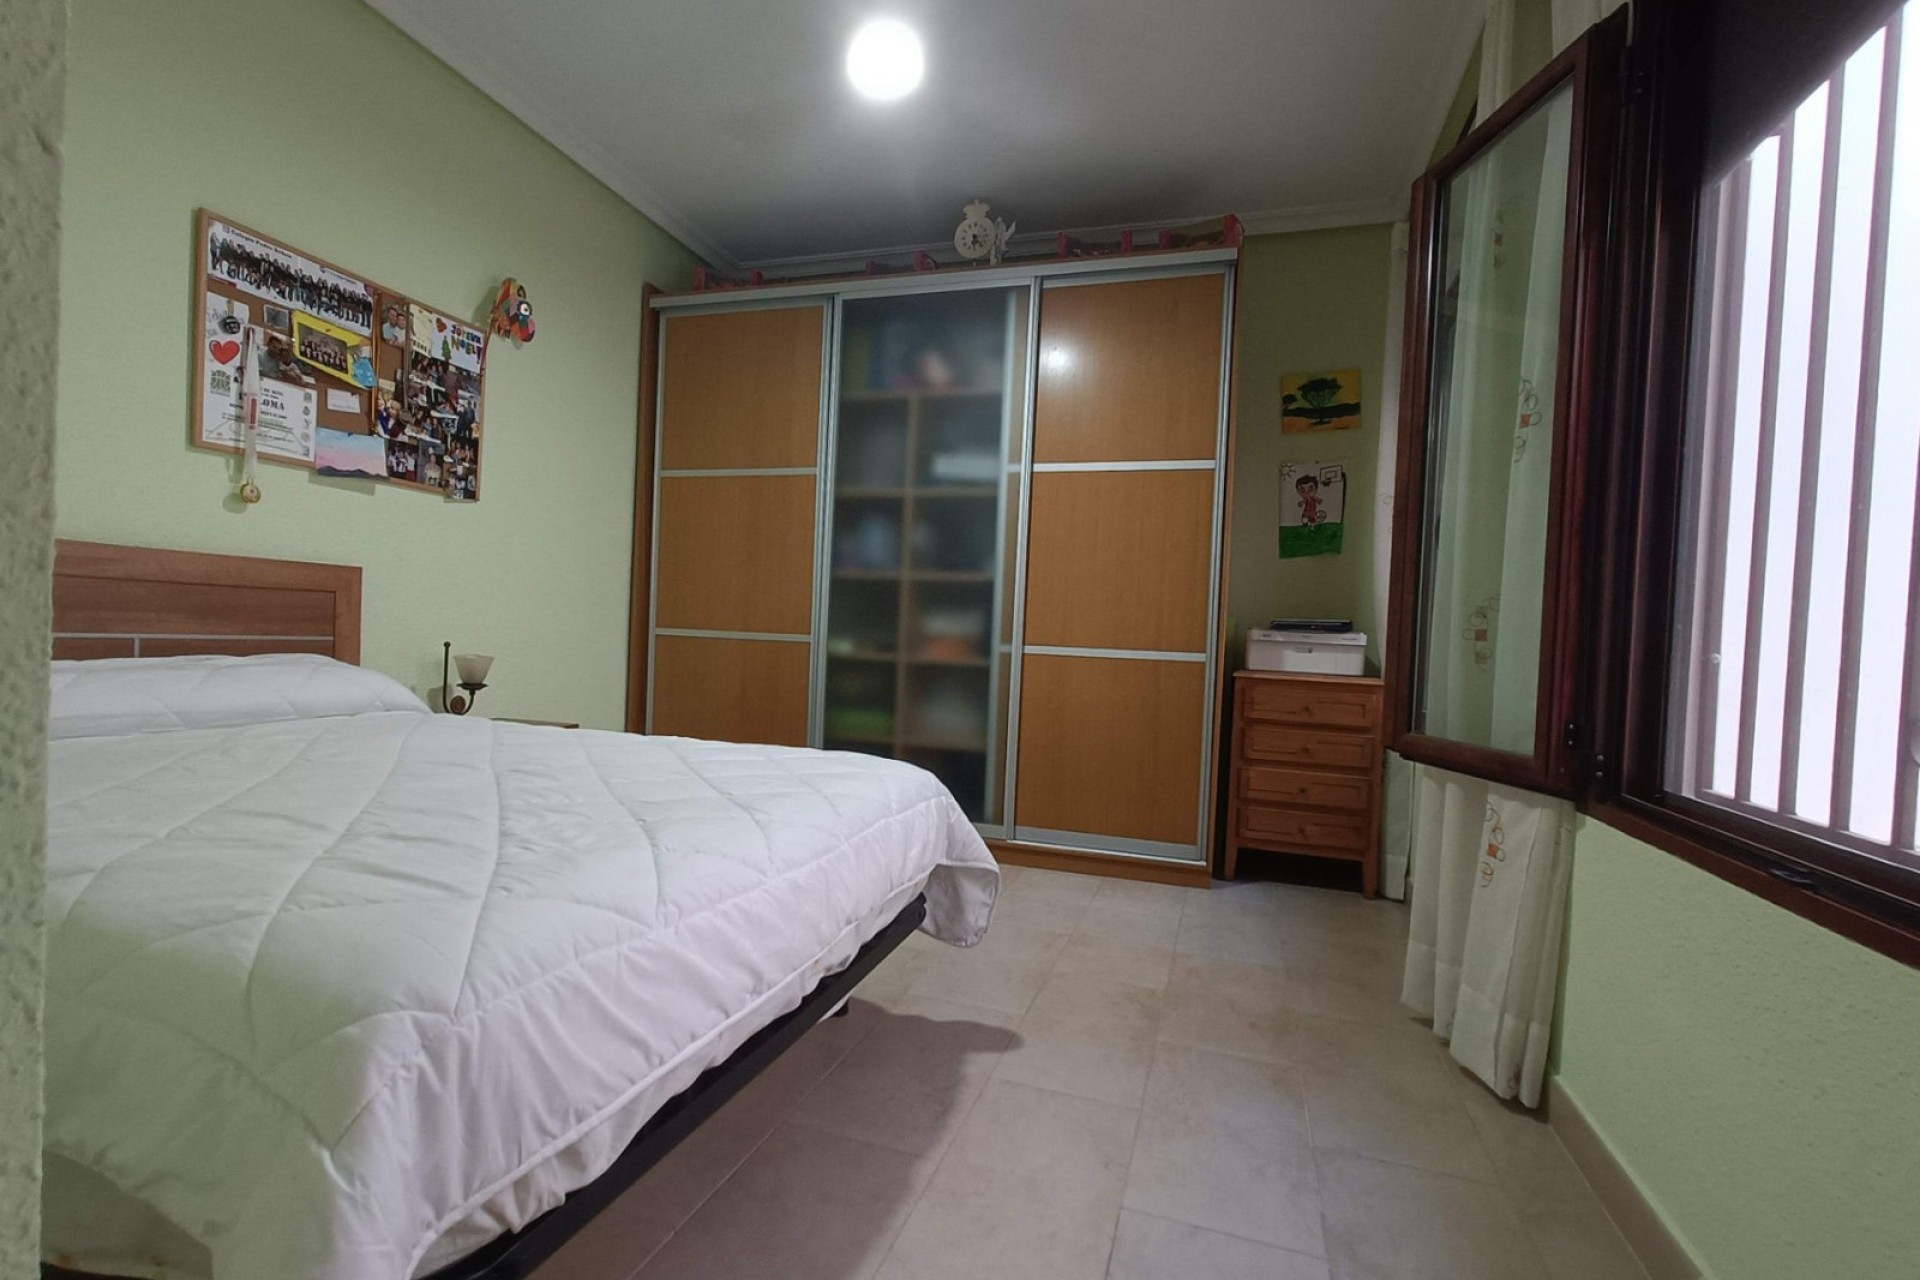 Resale - Town House -
Aspe - Inland